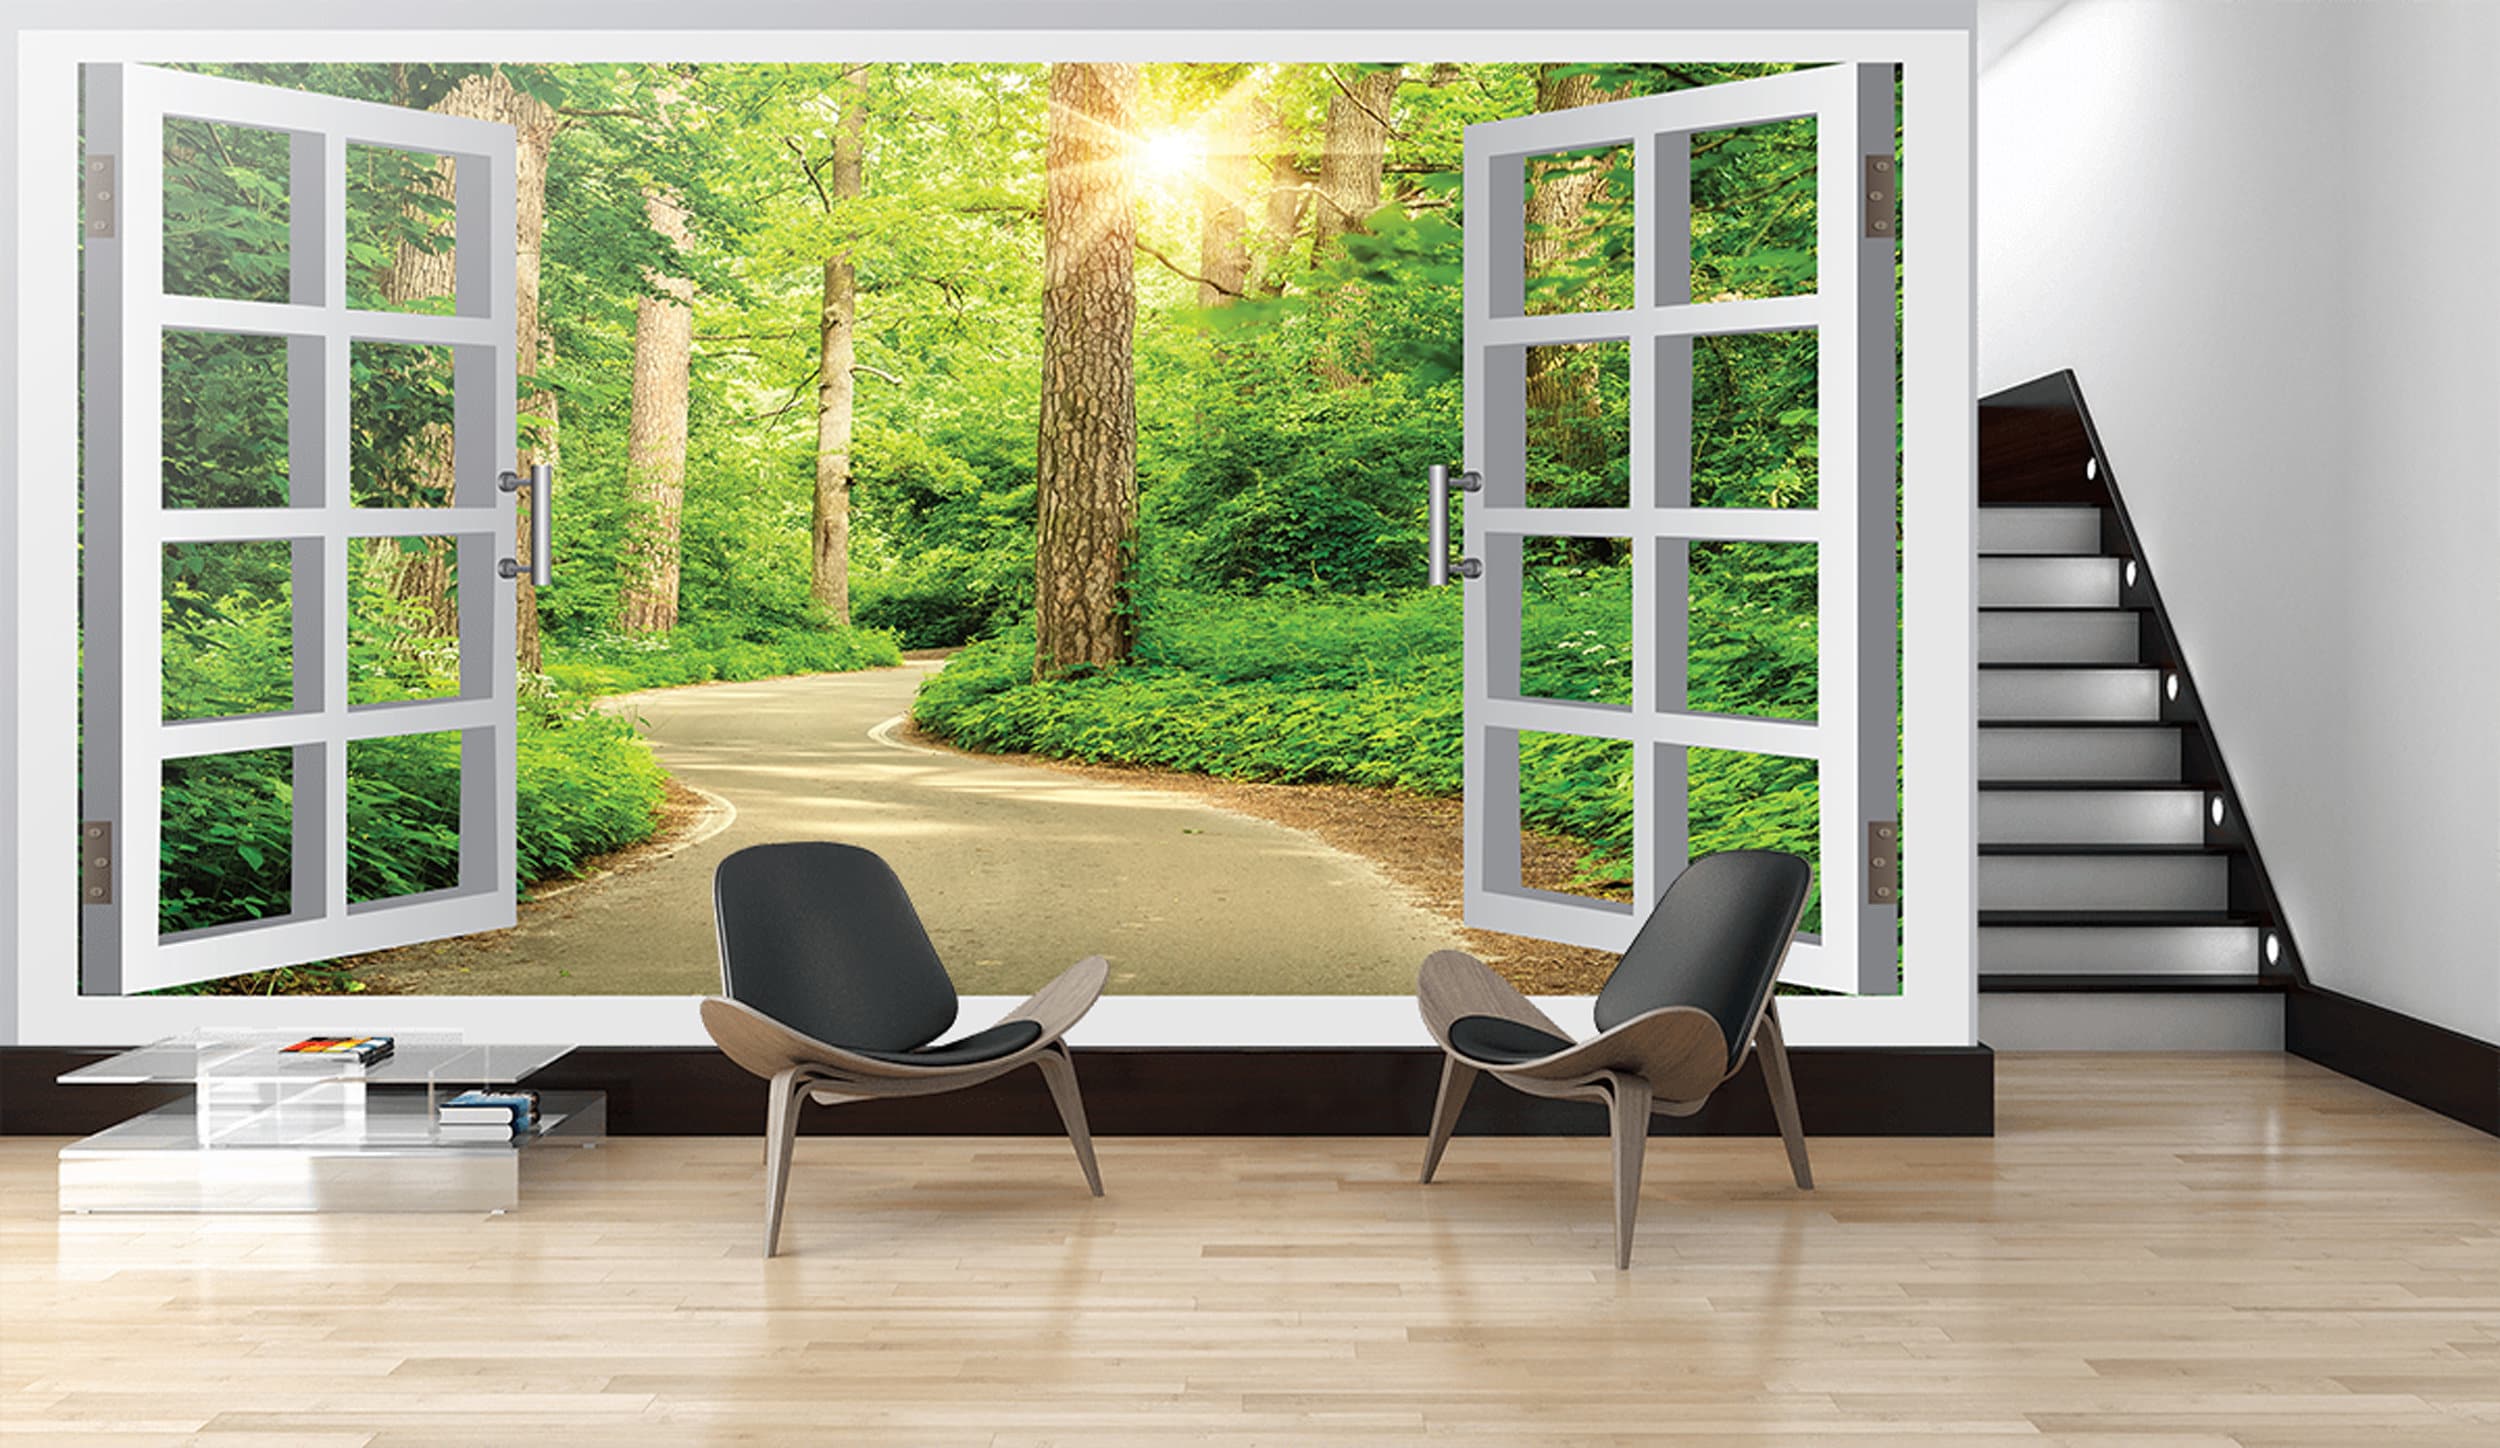 3D Digital Printing Wallpaper Window Landscape Nature Wall Panel For Home And Office Stylish Designs